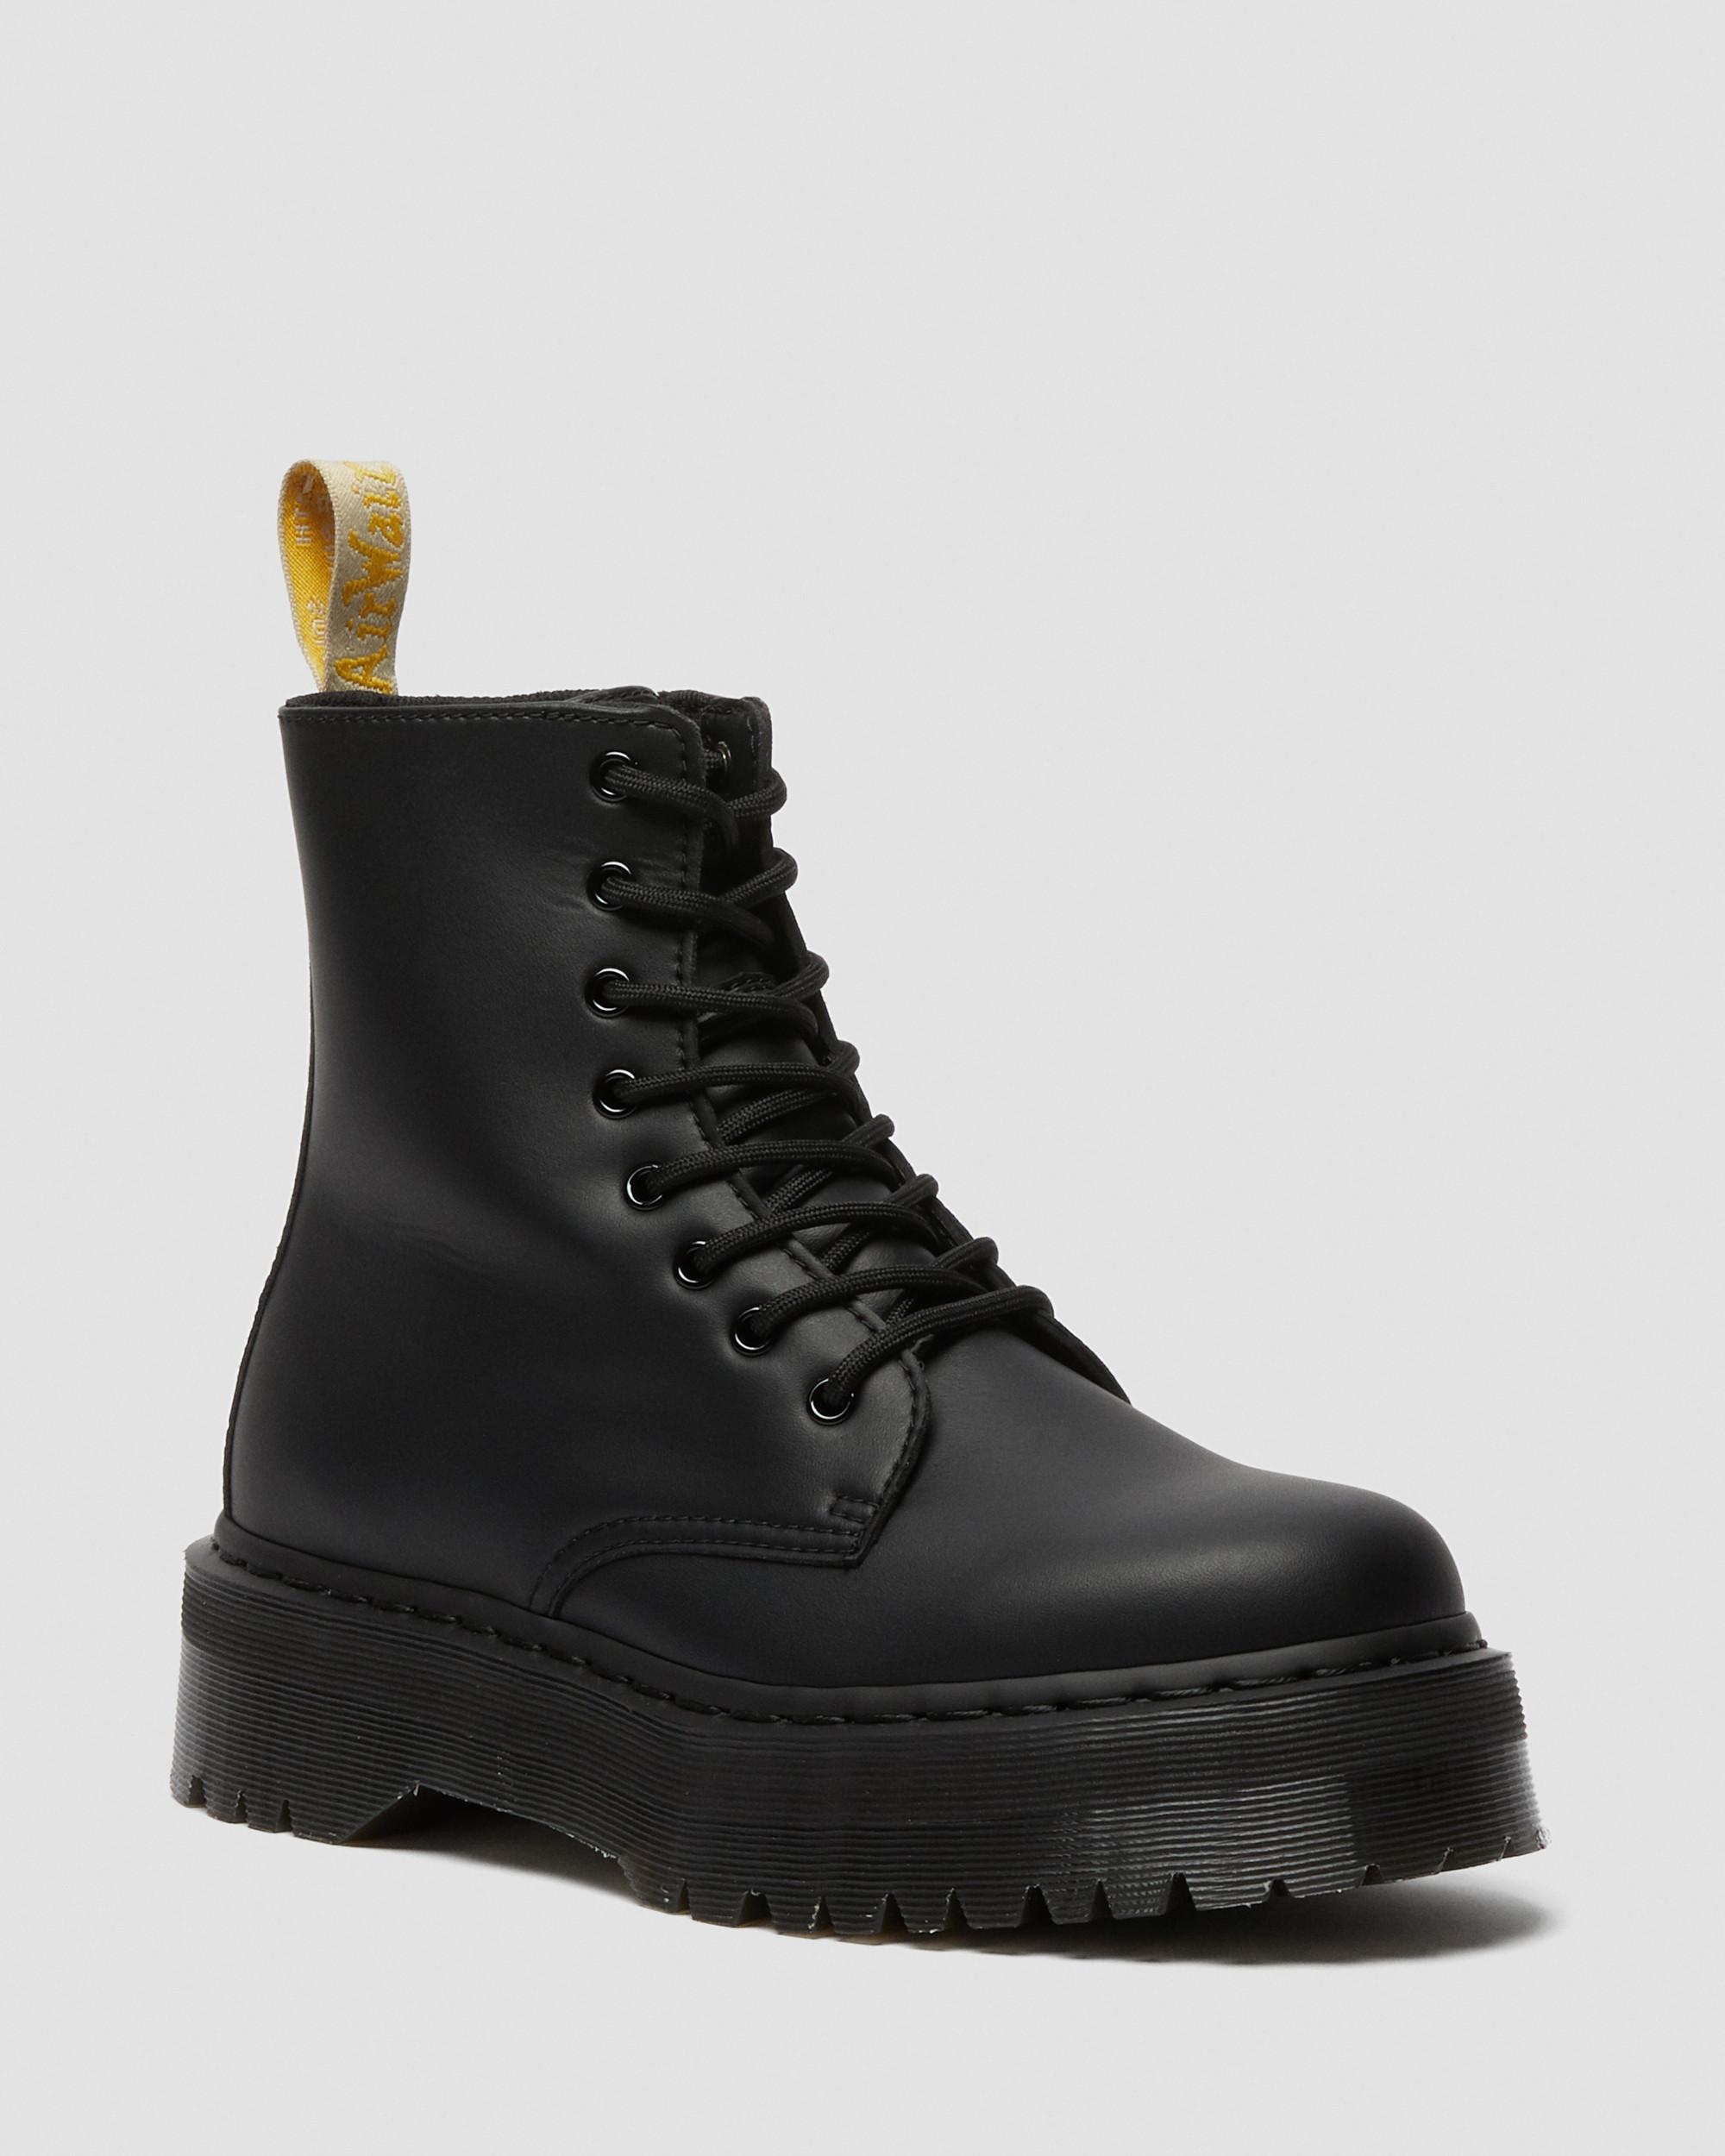 stores near me that sell doc martens